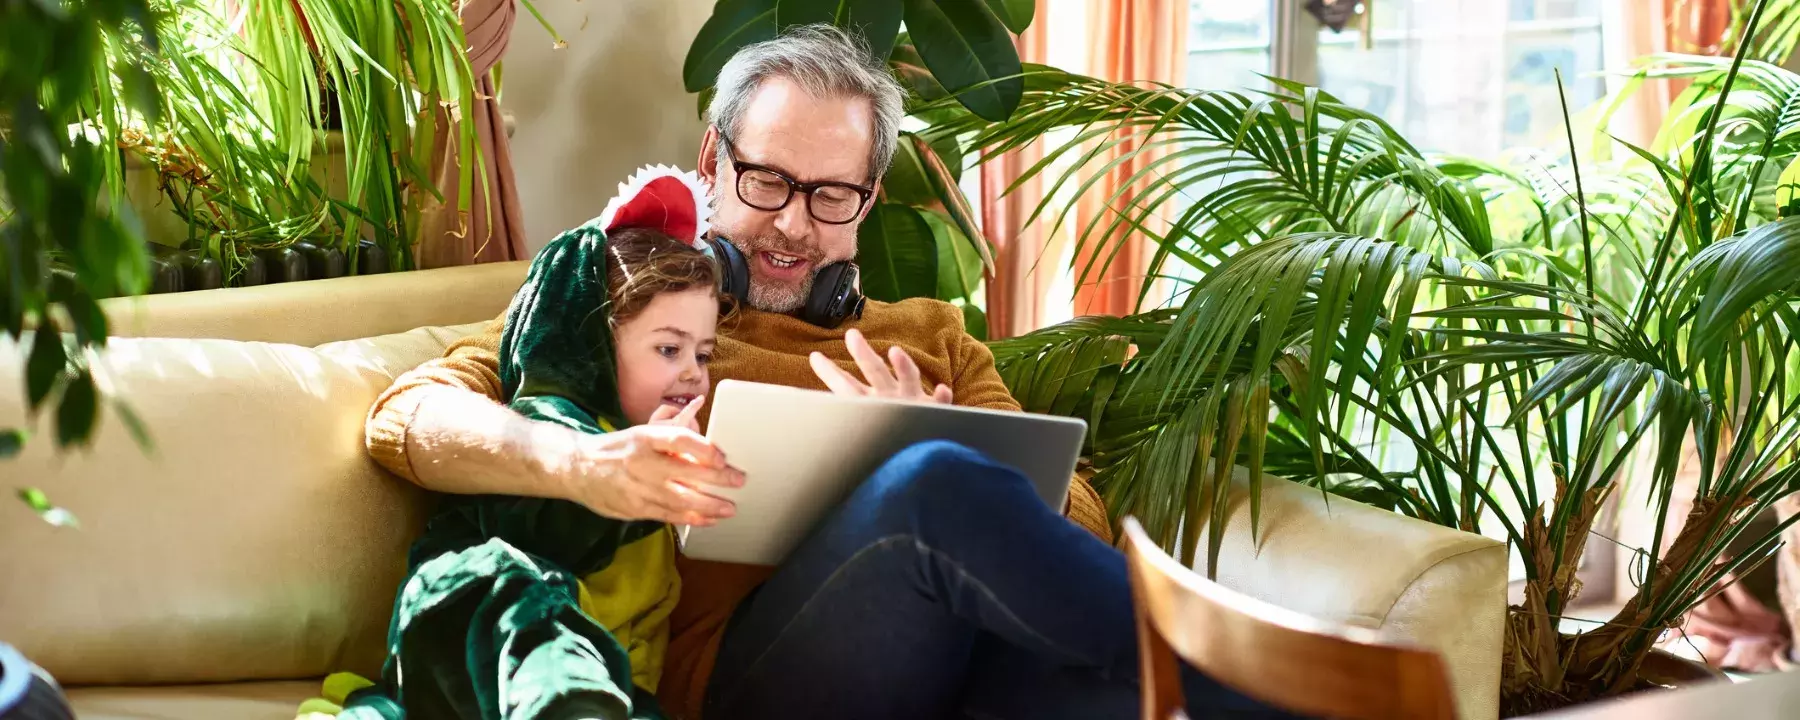 Grandfather playing game on laptop with granddaughter - 1800x720 GettyImages-1166771651